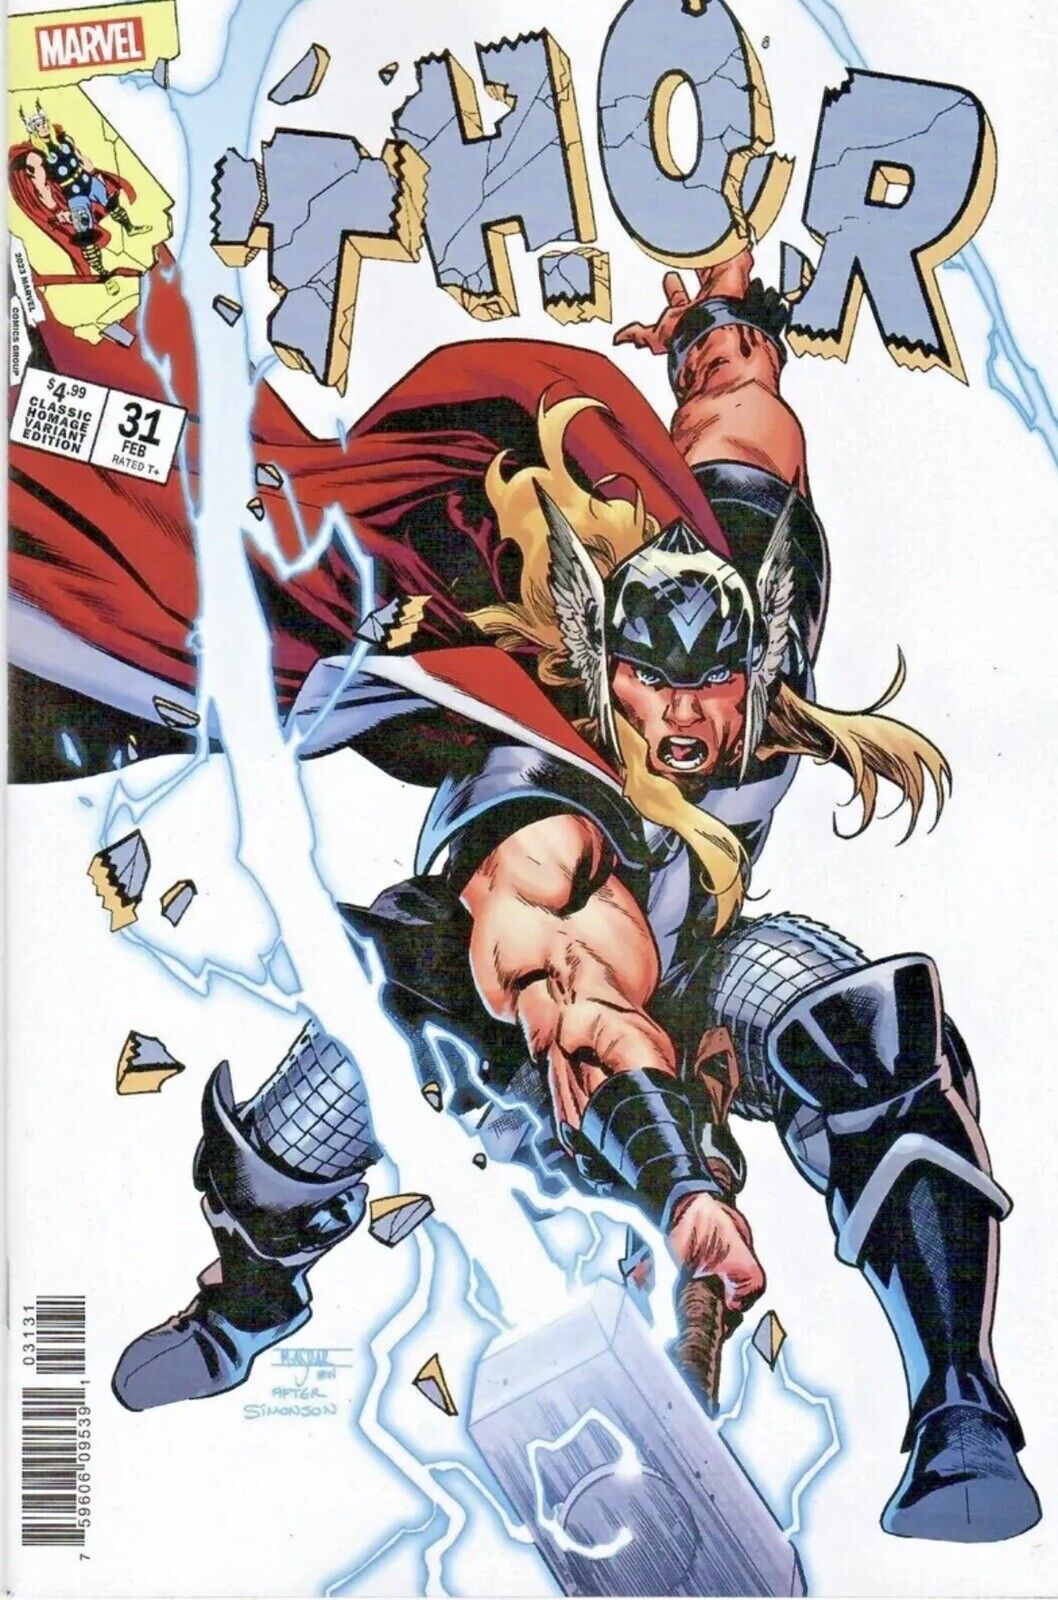 THOR #31 ASRAR CLASSIC HOMAGE VARIANT NM COMBINED SHIPPING AVAILABLE